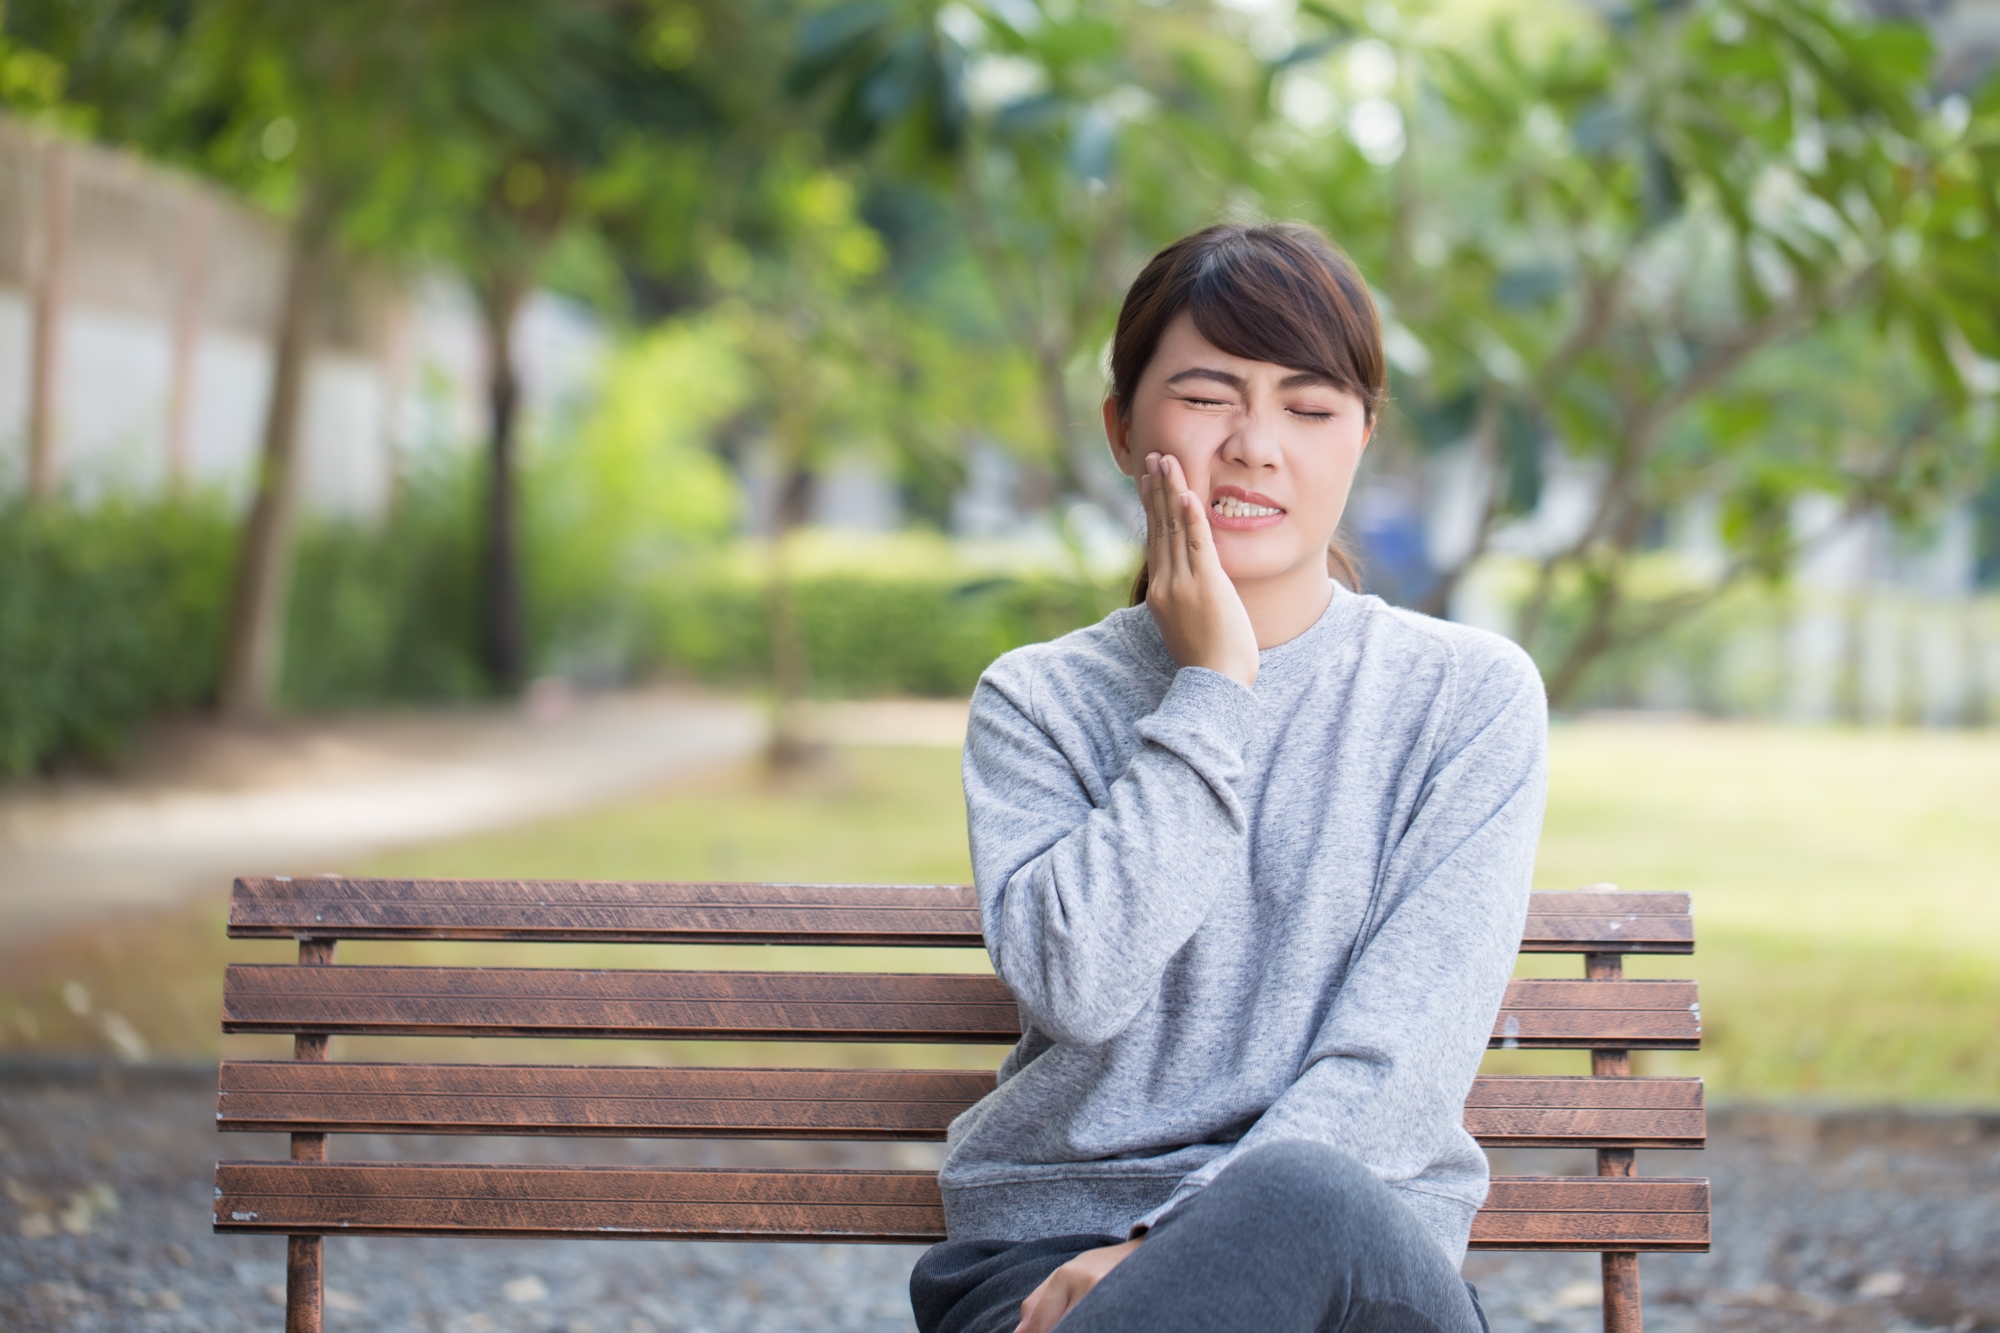 Woman on park bench with a toothache